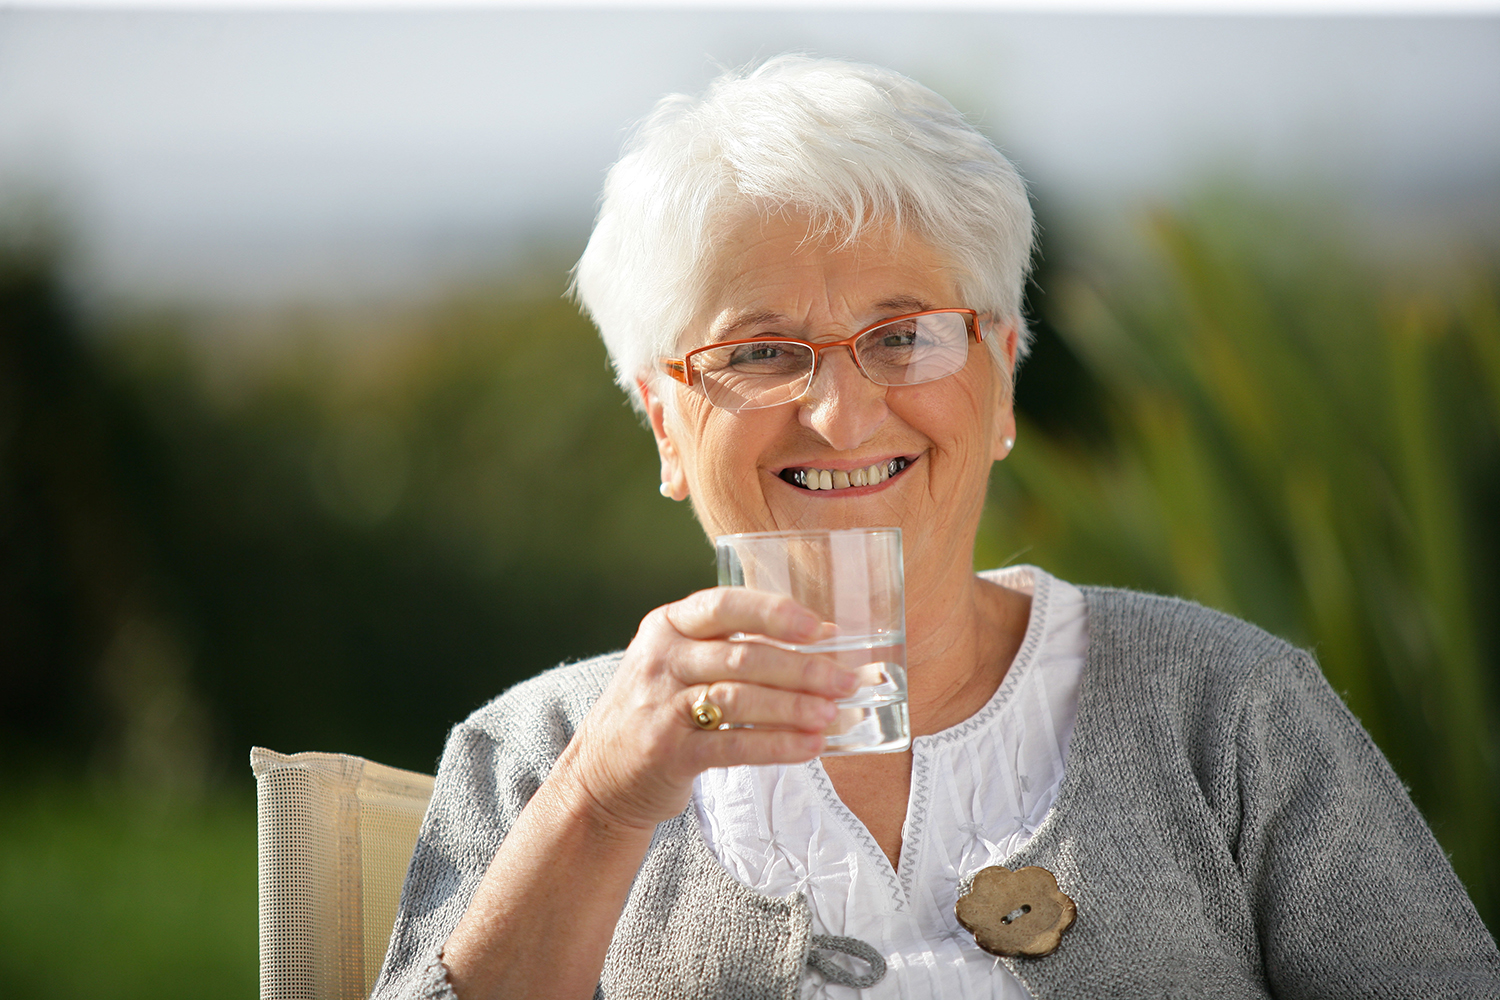 Tips for helping seniors get enough fluids in warmer weather